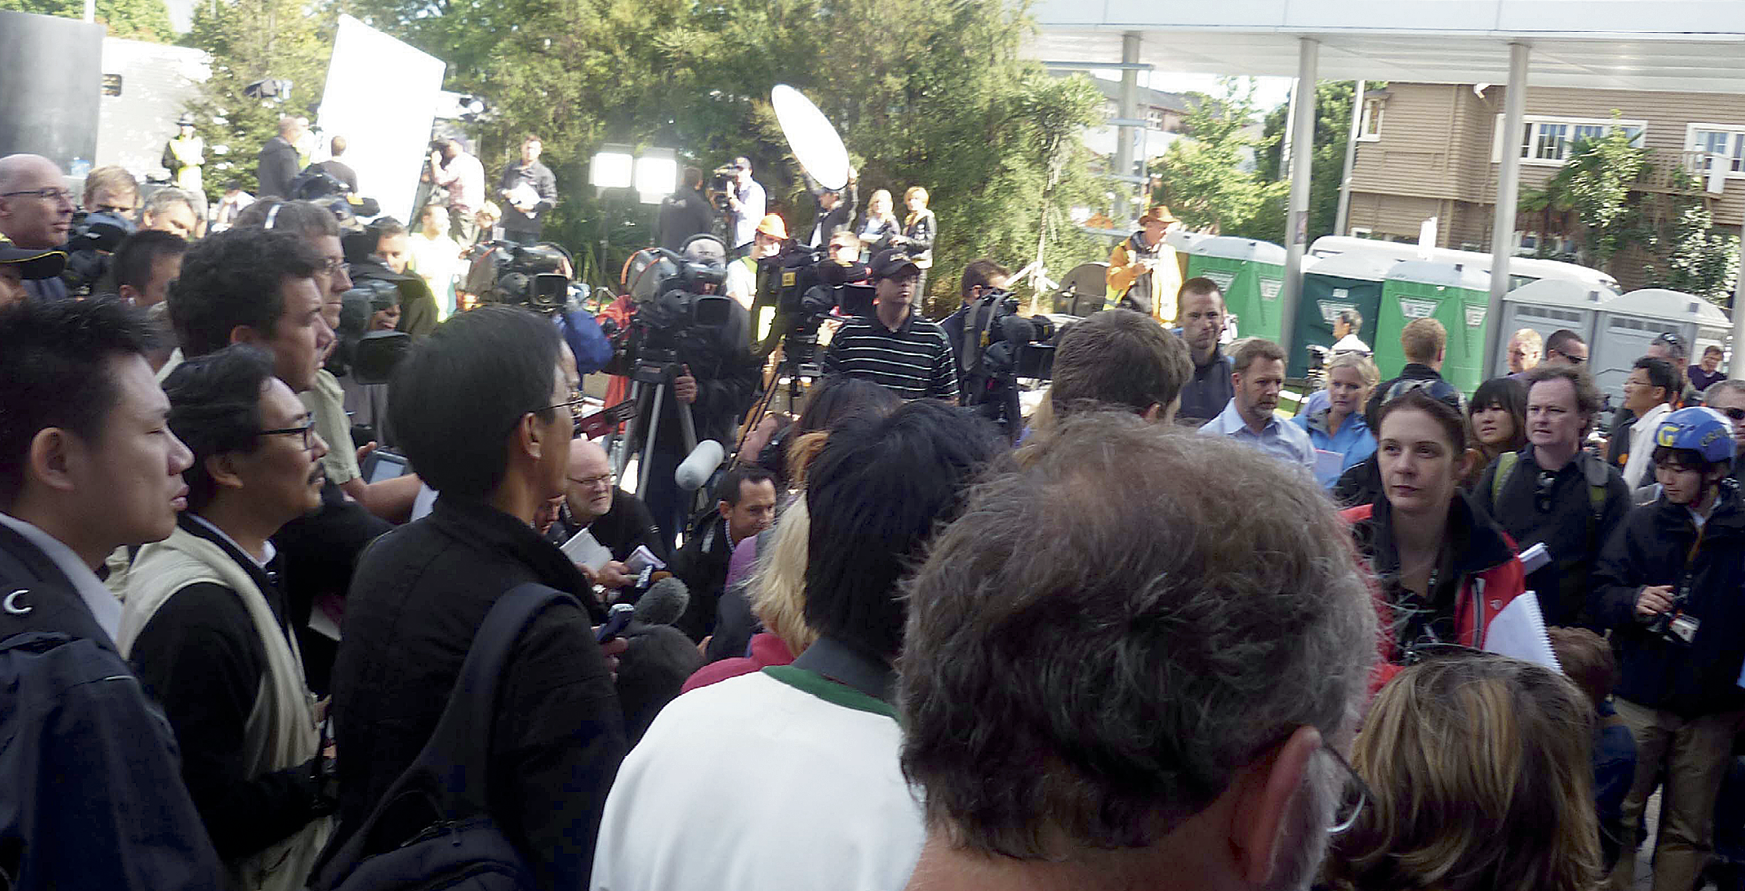 Photograph of a crowd of media personnel